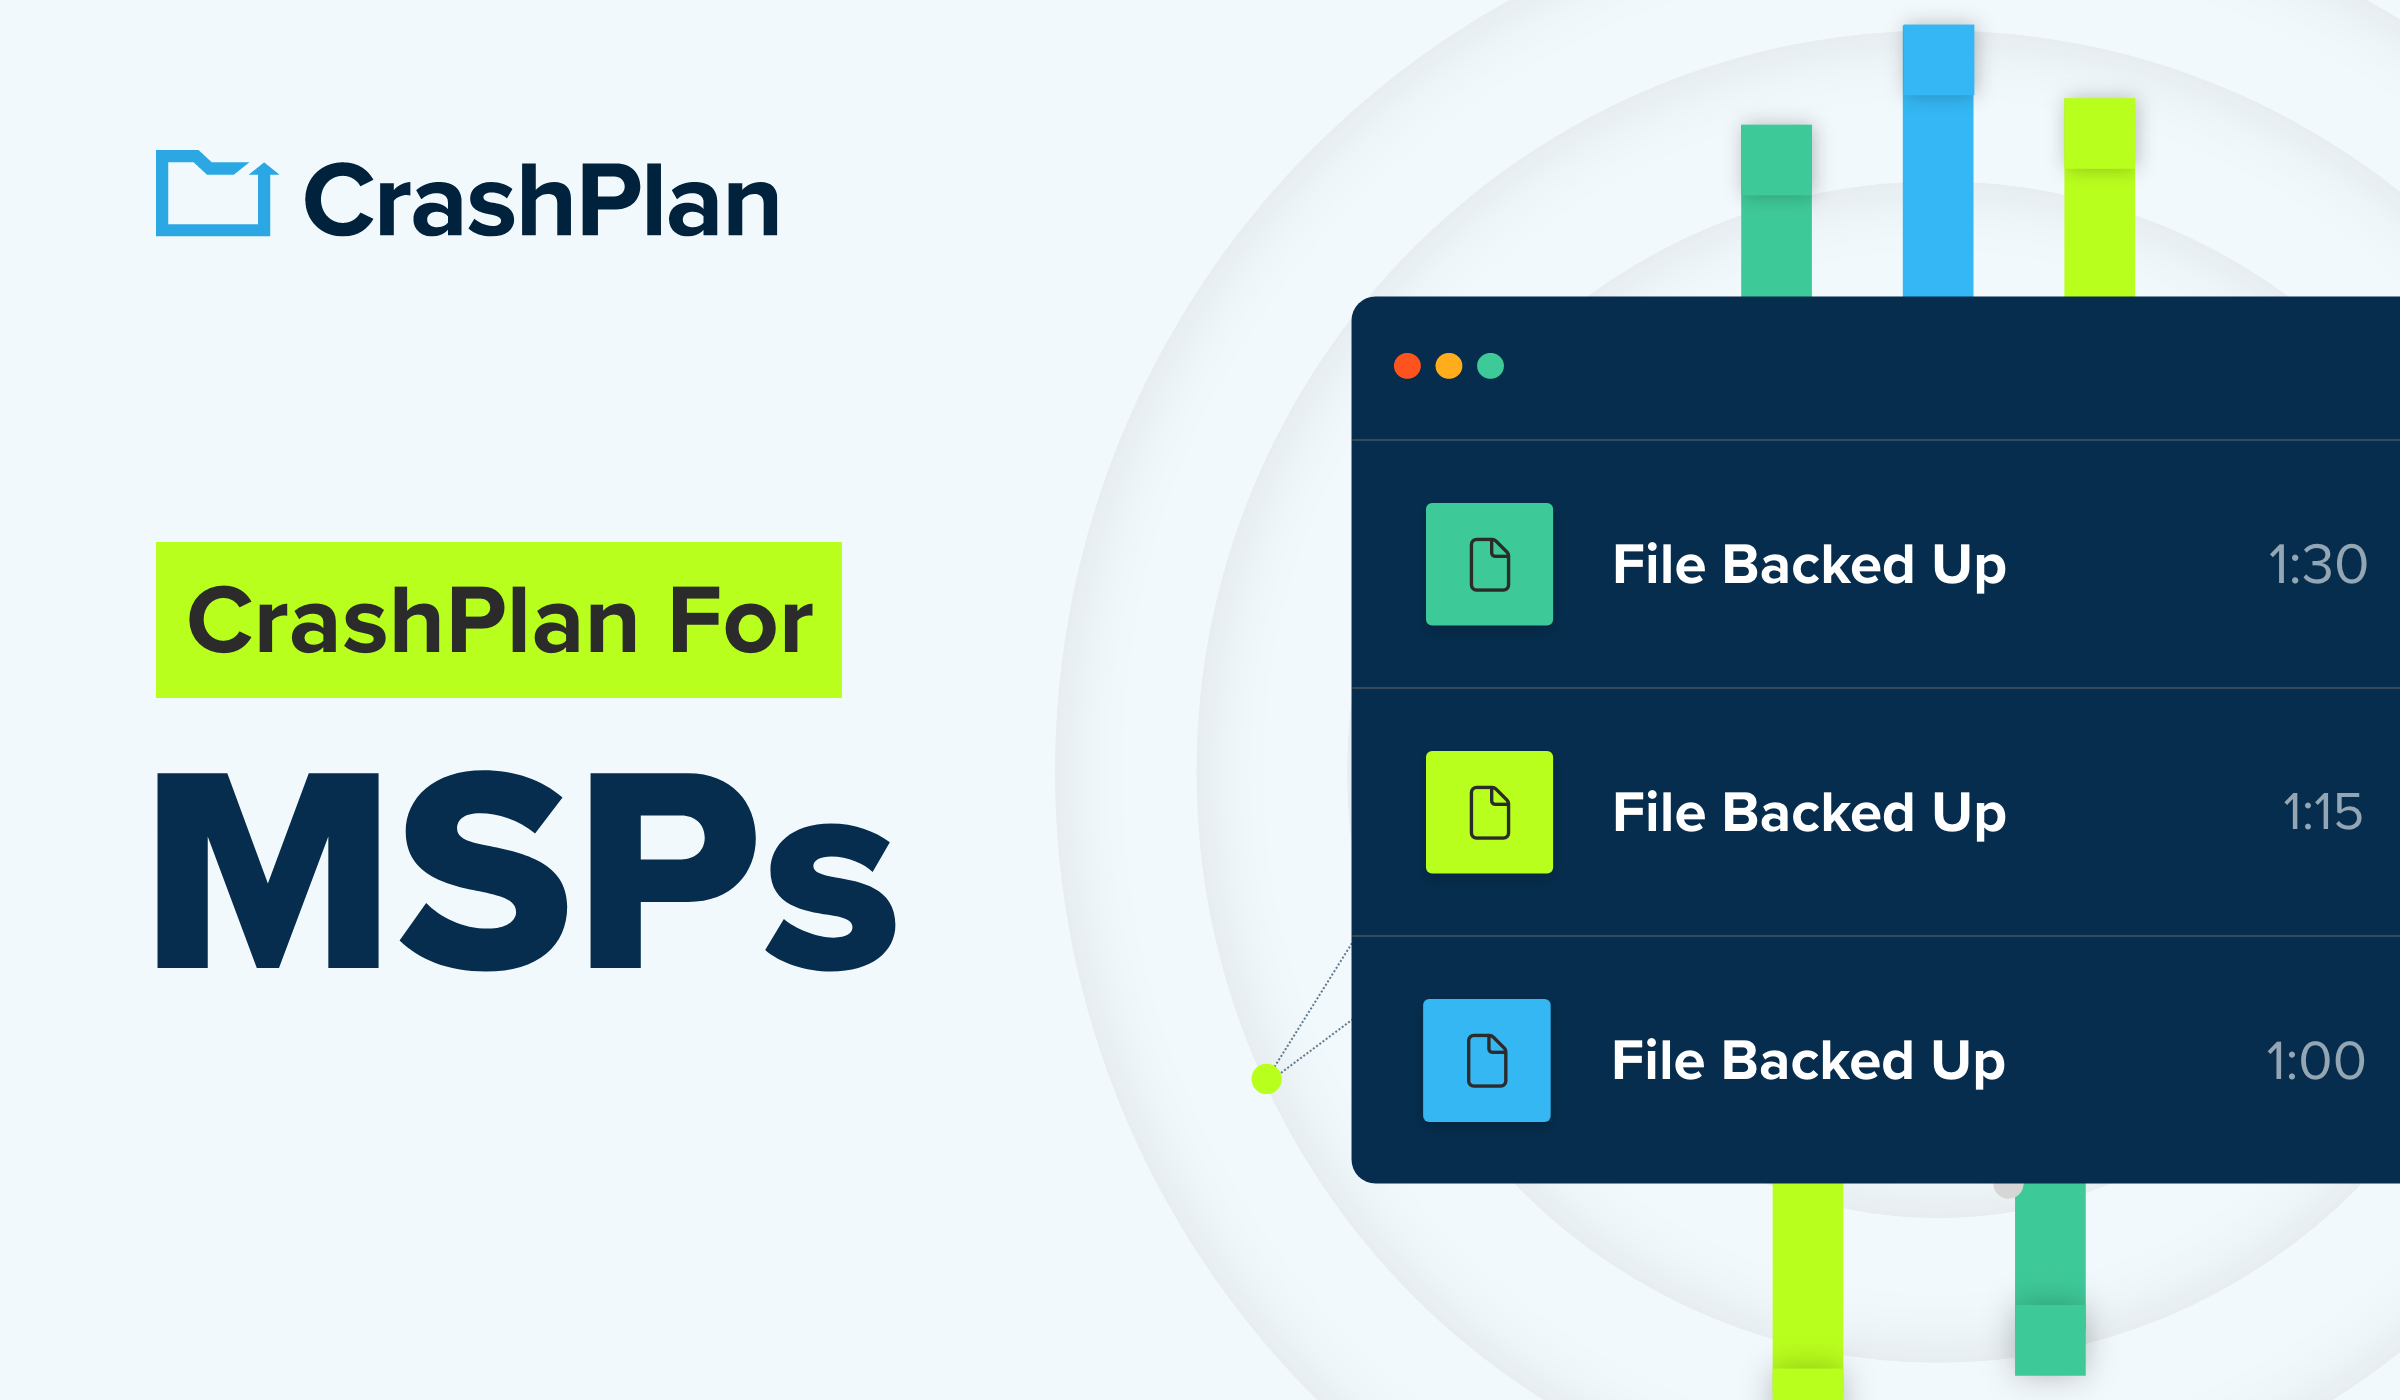 Press release announcing CrashPlan for MSPs with graphics that highlights how our endpoint backup solutions back up files every 15 minutes